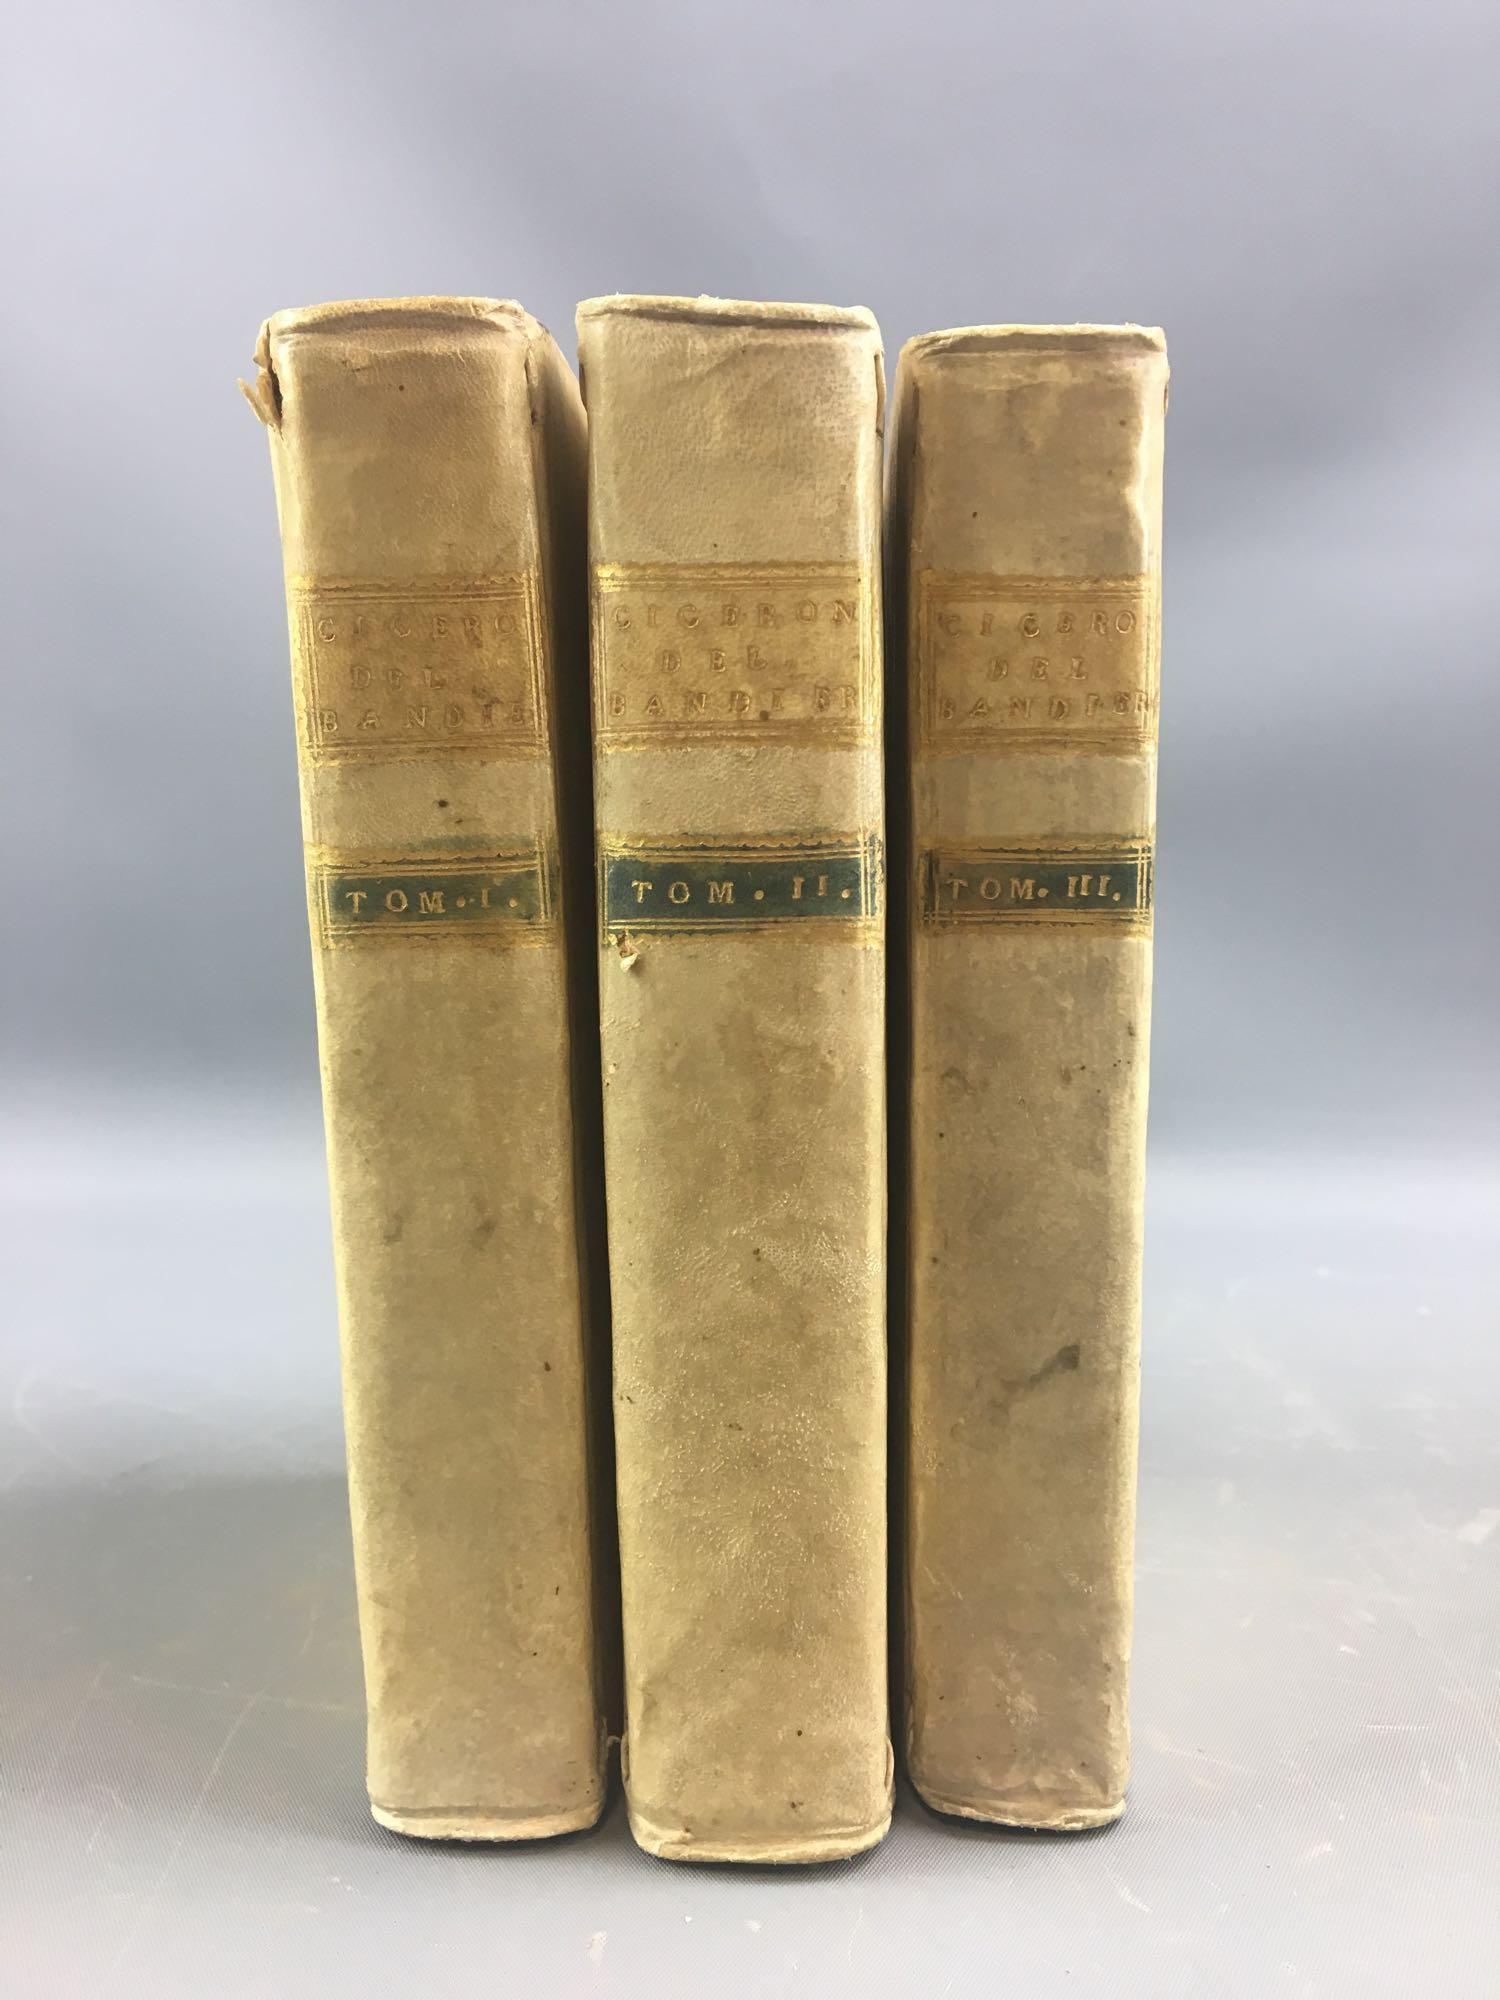 Group of 3 Antique Ciceron Del Bandier Volumes 1,2 and 3 Books